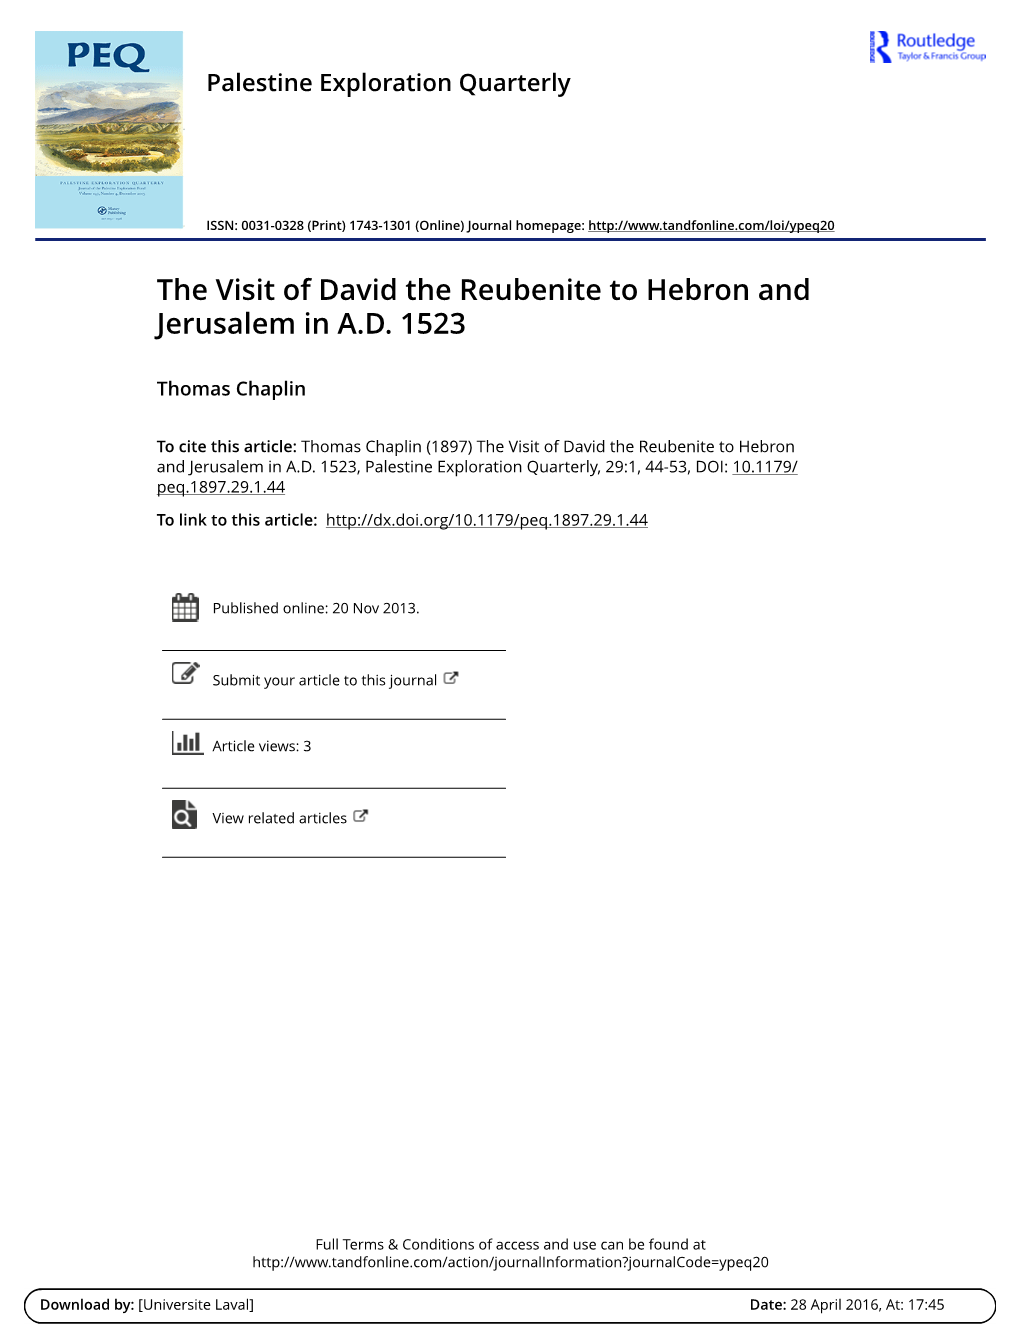 The Visit of David the Reubenite to Hebron and Jerusalem in A.D. 1523